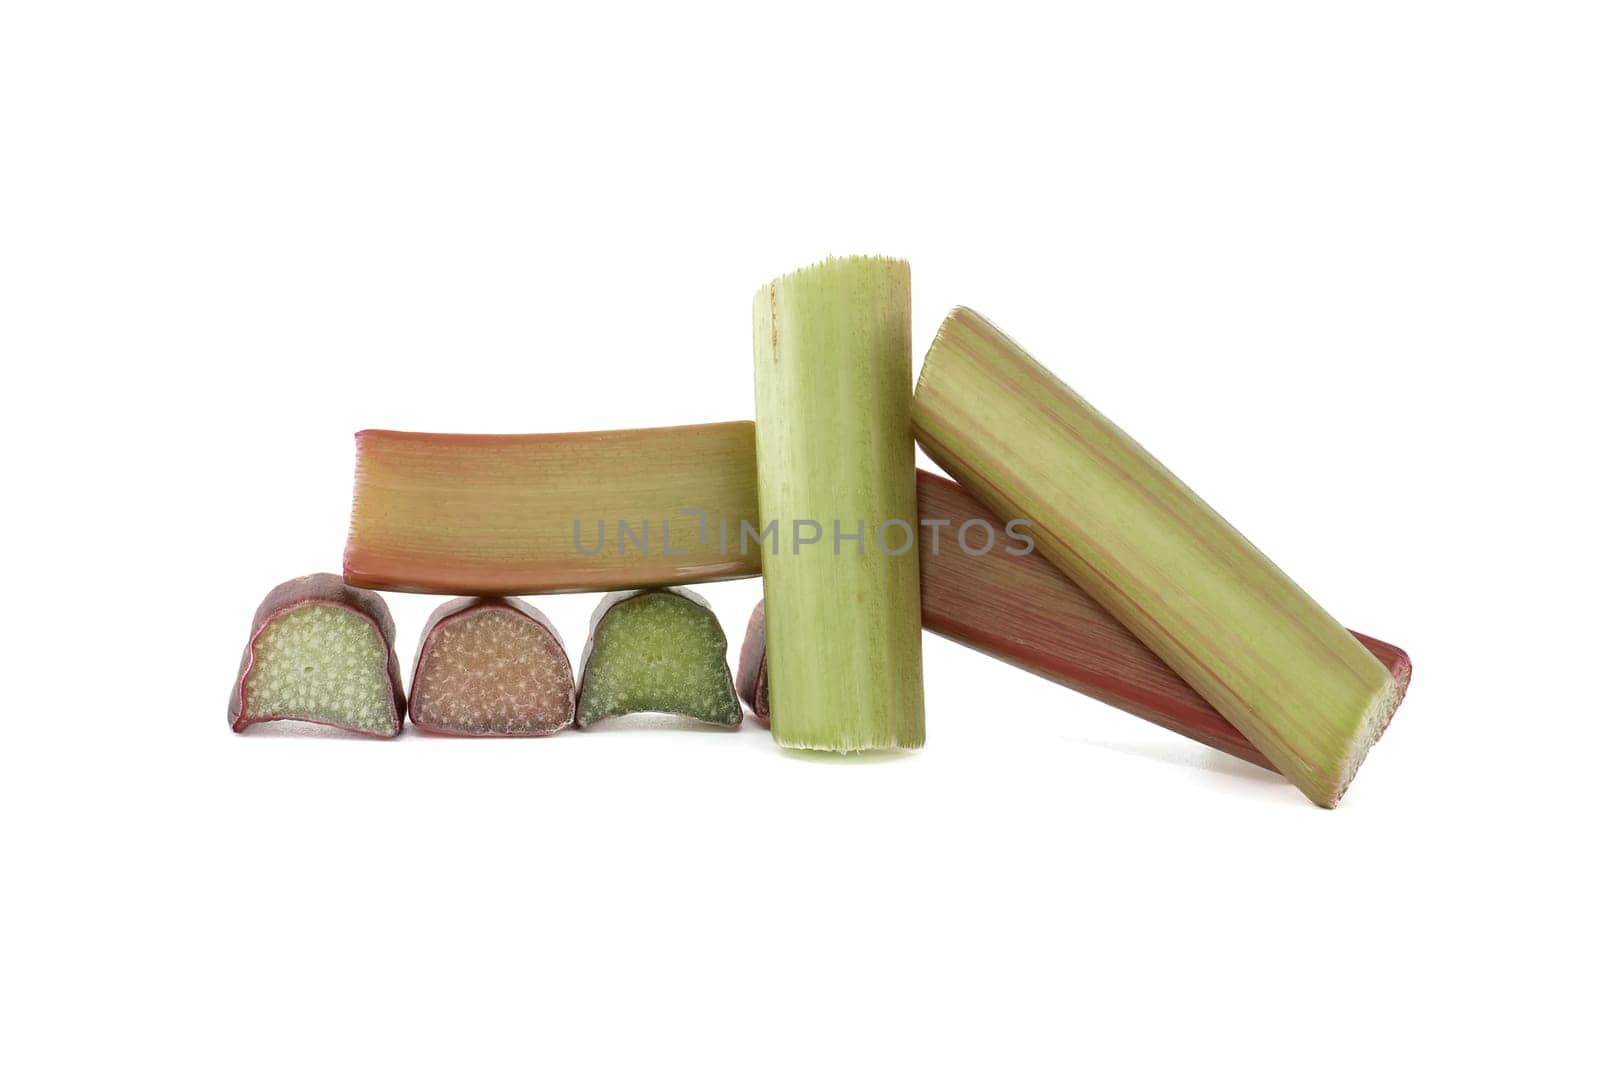 Group of rhubarb pieces in various shapes and sizes arranged in a scattered formation isolated on white background